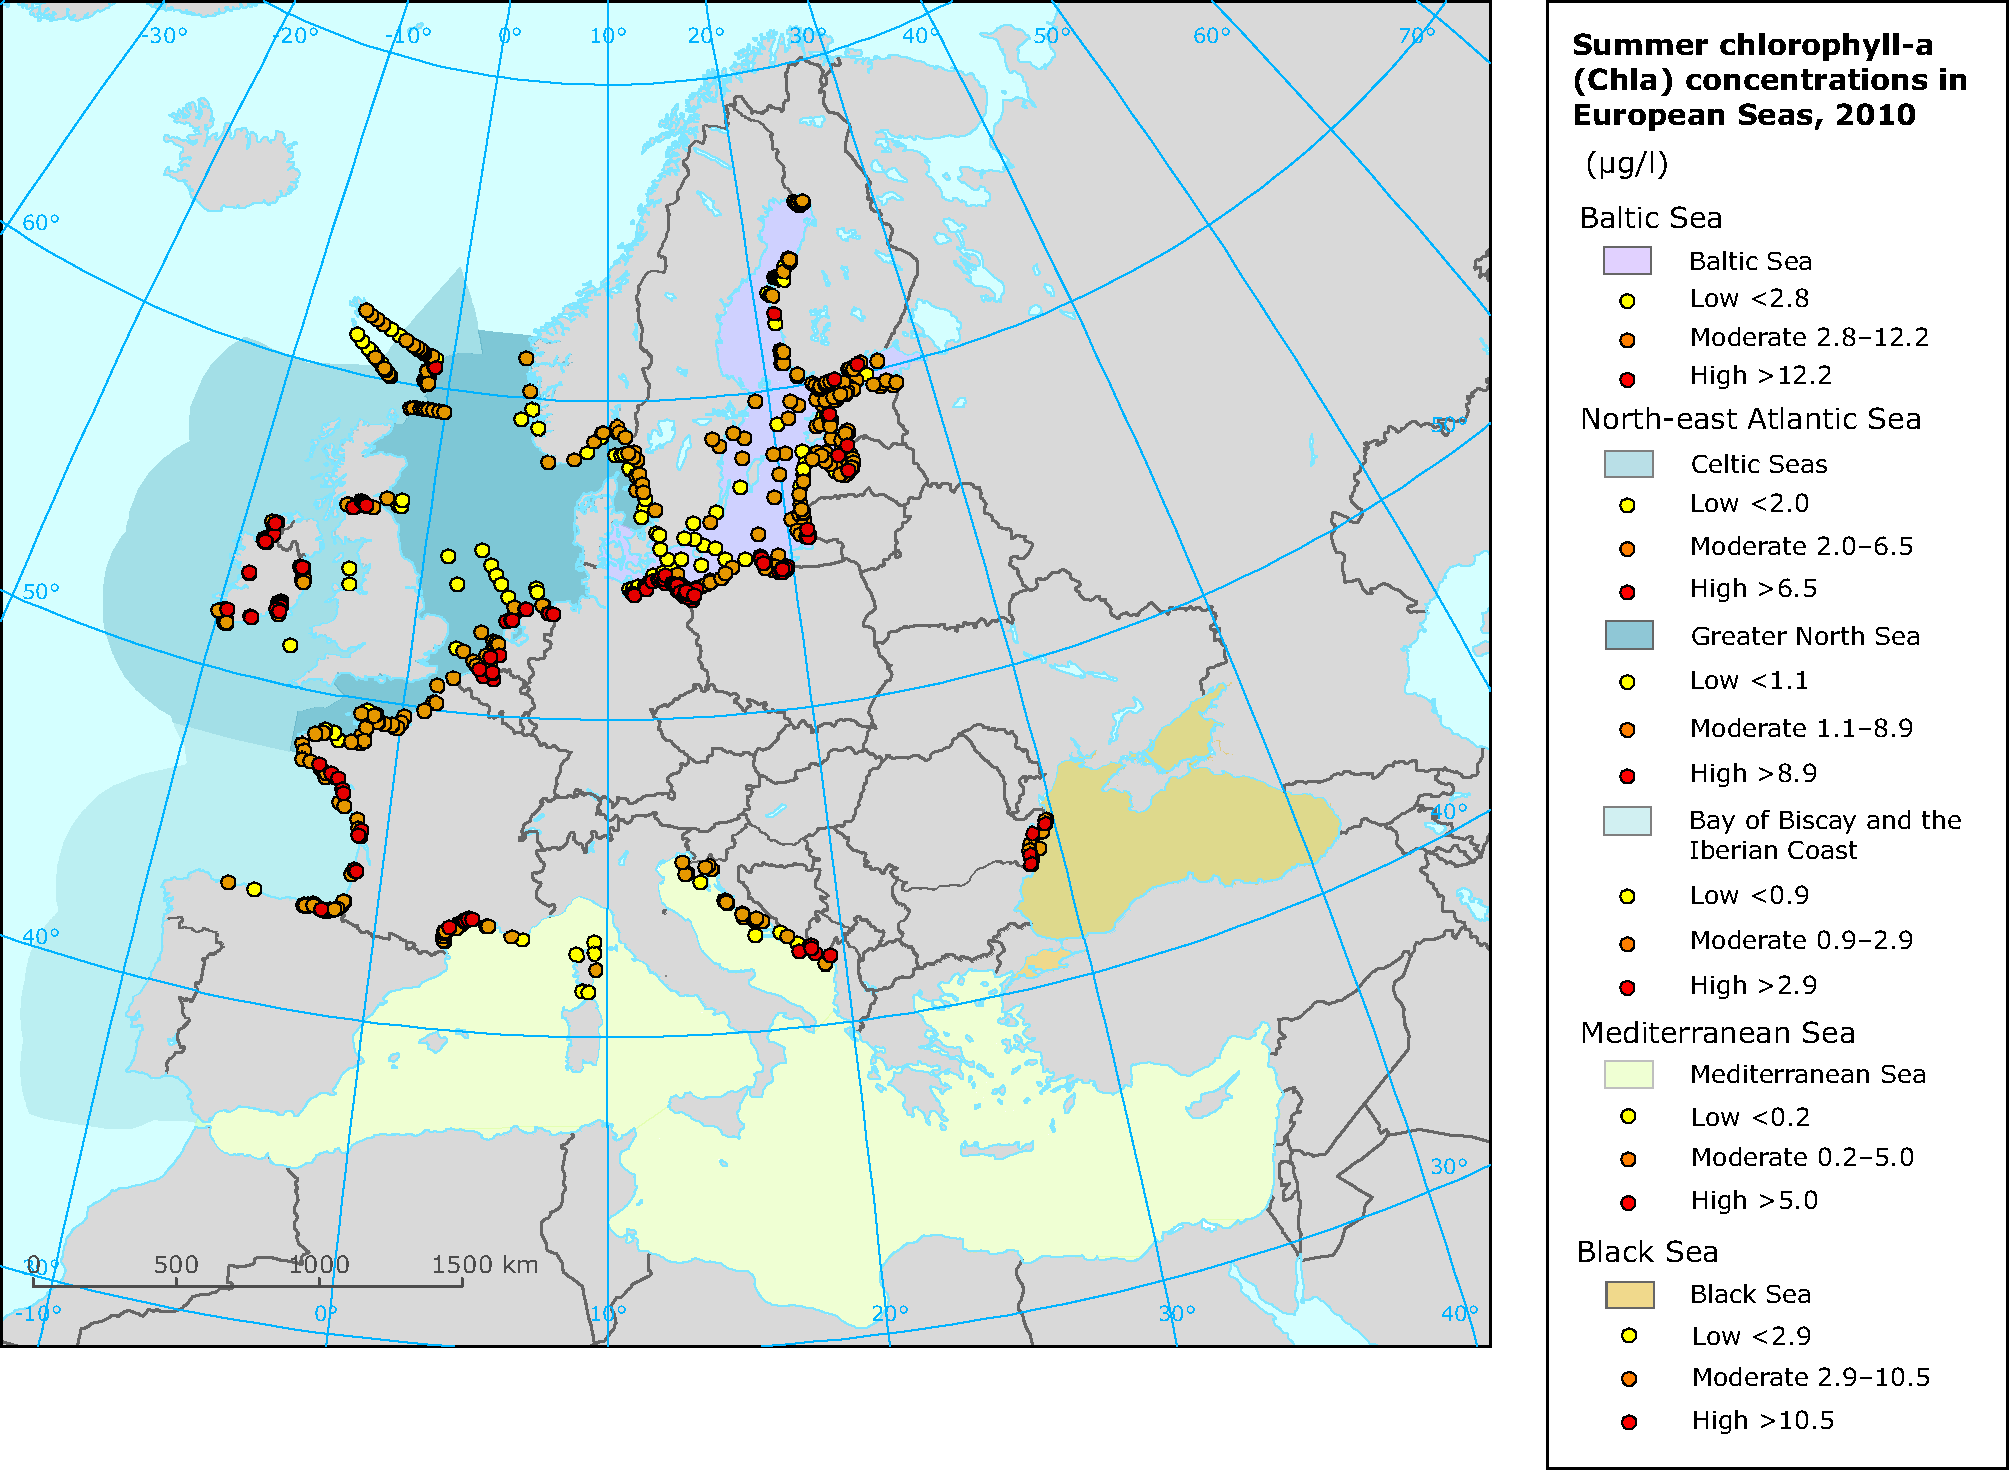 Chlorophyll-a concentrations in European seas in 2010